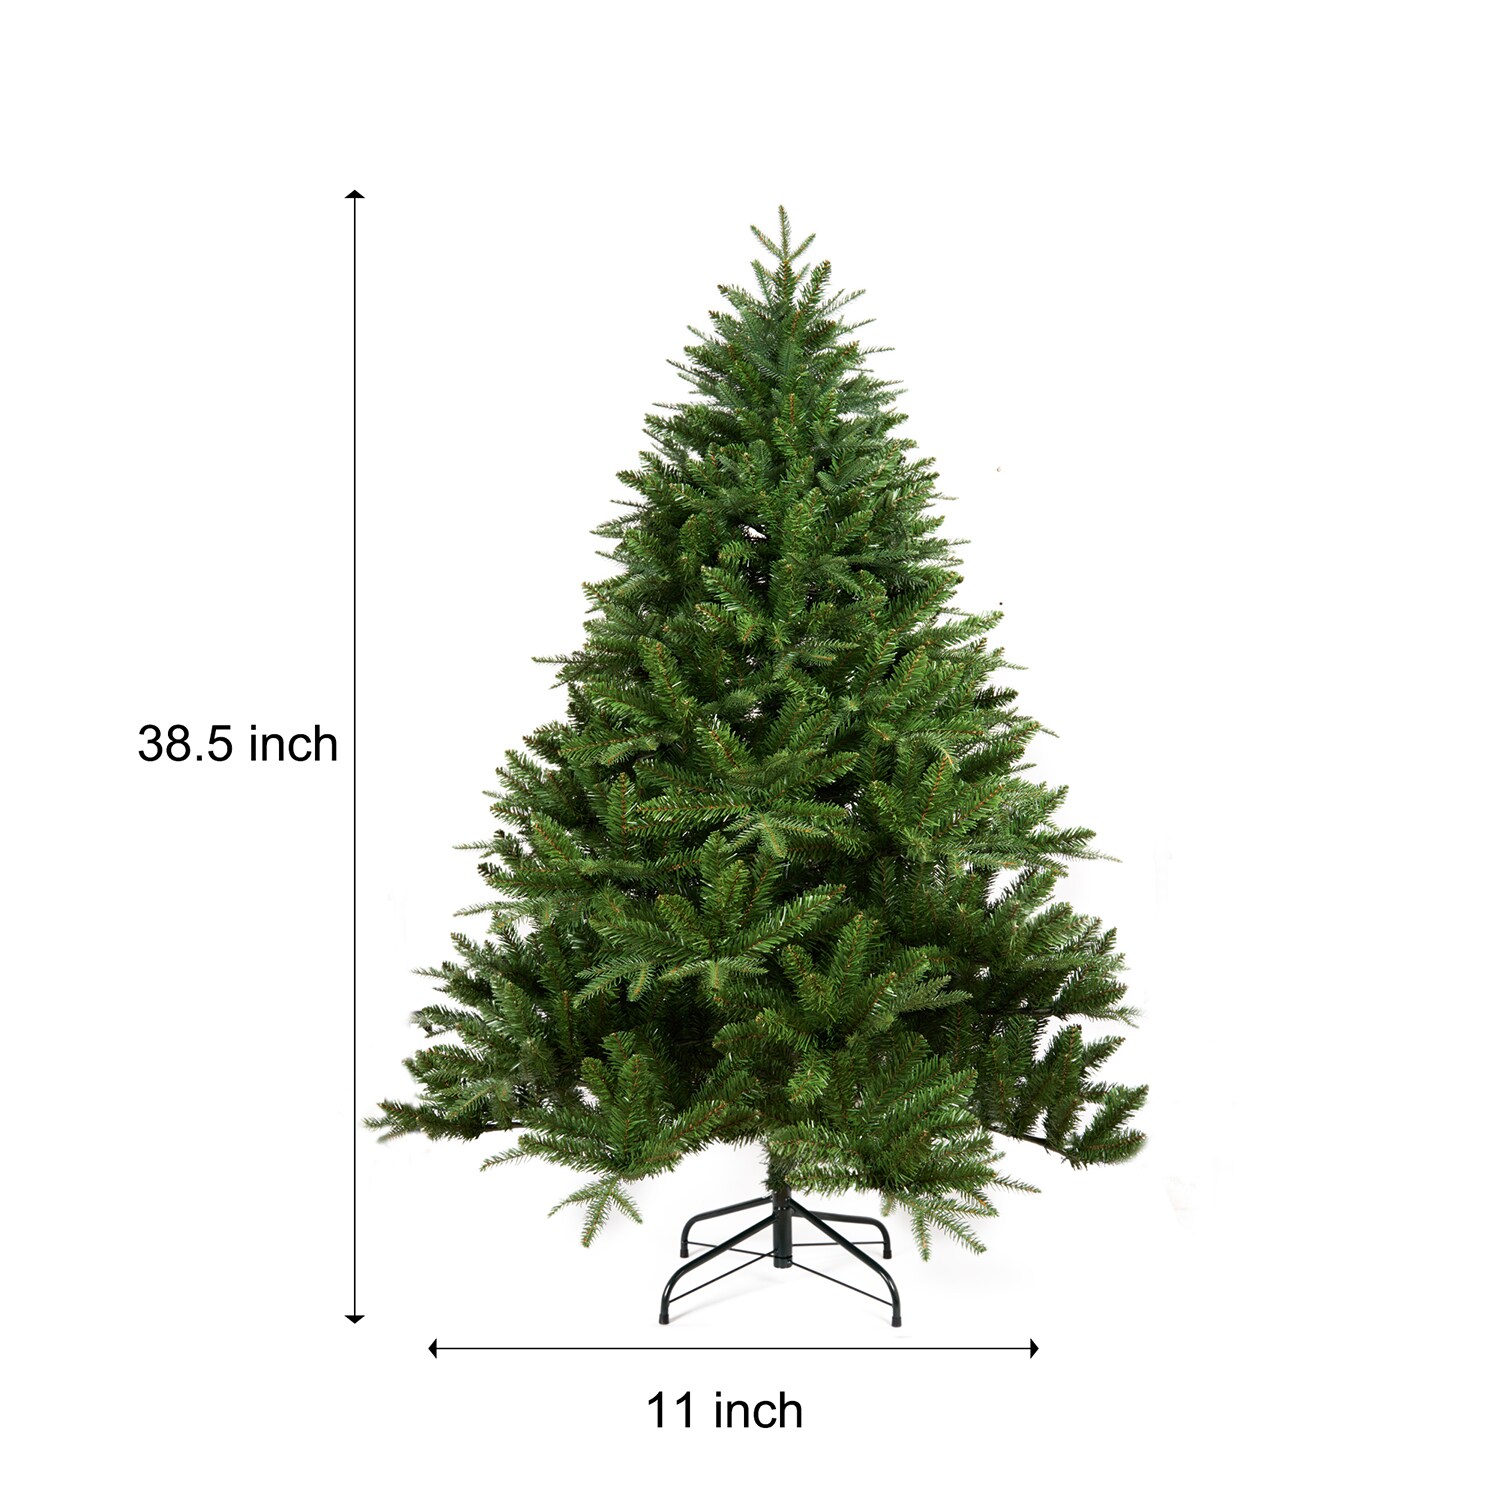 Bybafun 6-ft Pre-lit Flocked Artificial Christmas Tree with LED Lights ...